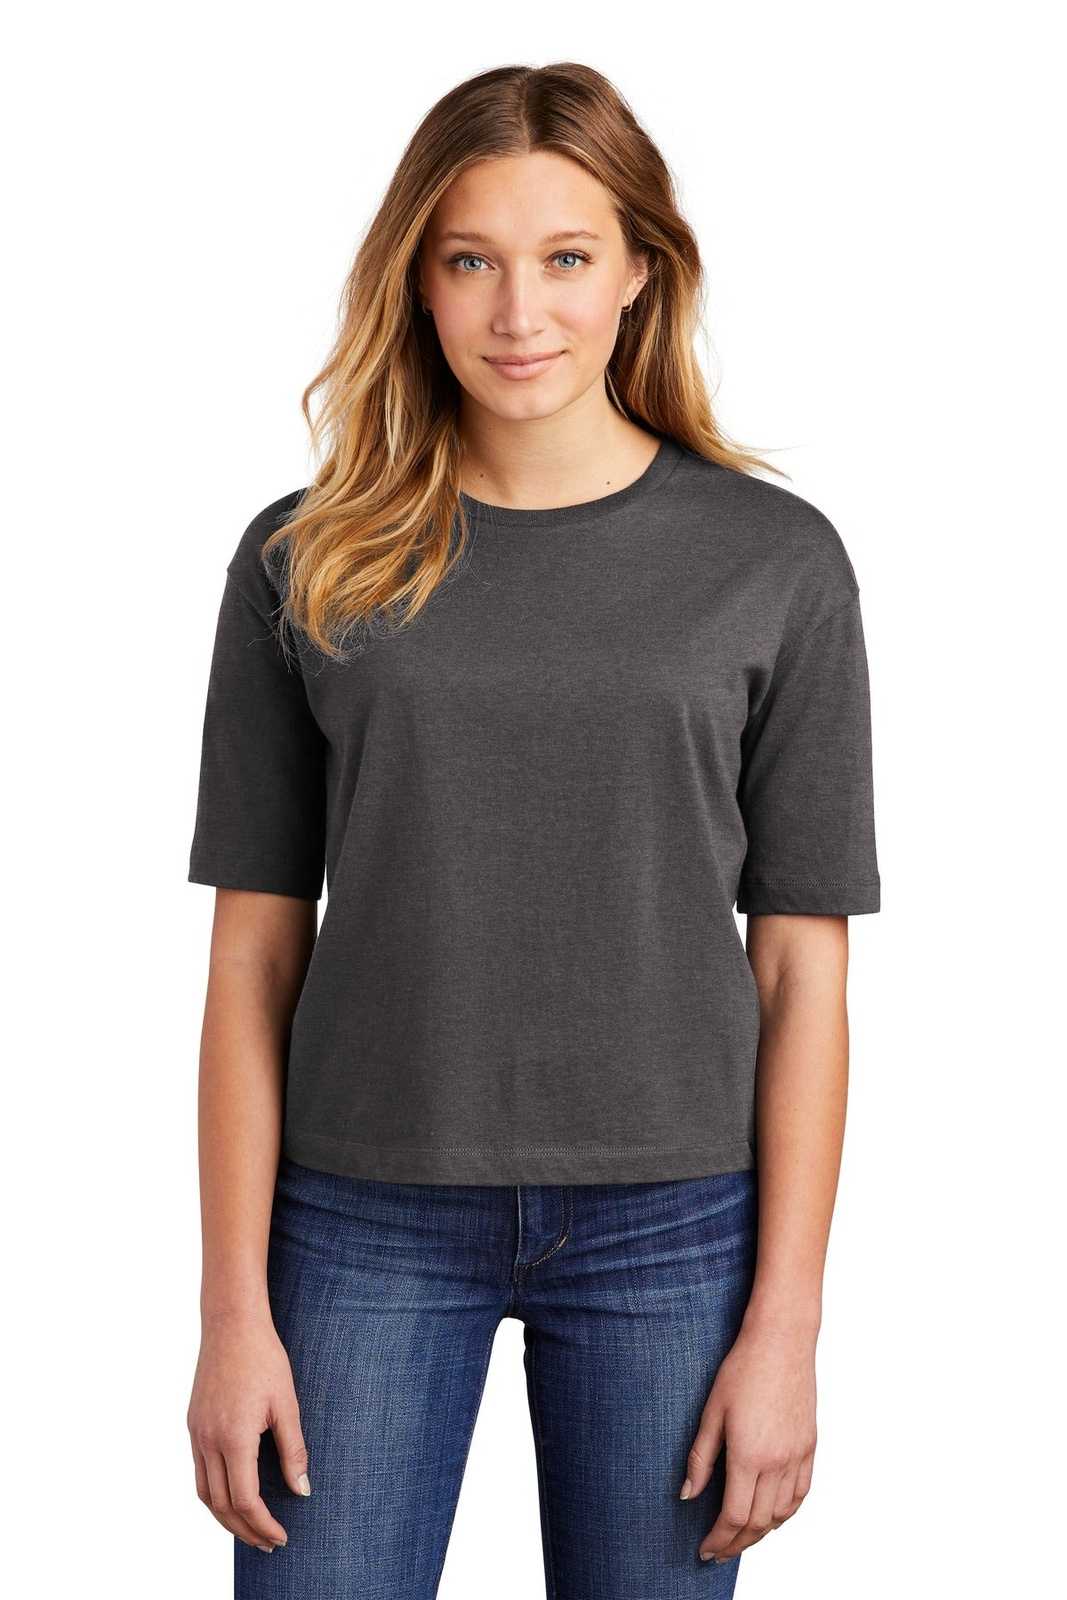 District DT6402 Women's V.I.T. Boxy Tee - Heathered Charcoal - HIT a Double - 1